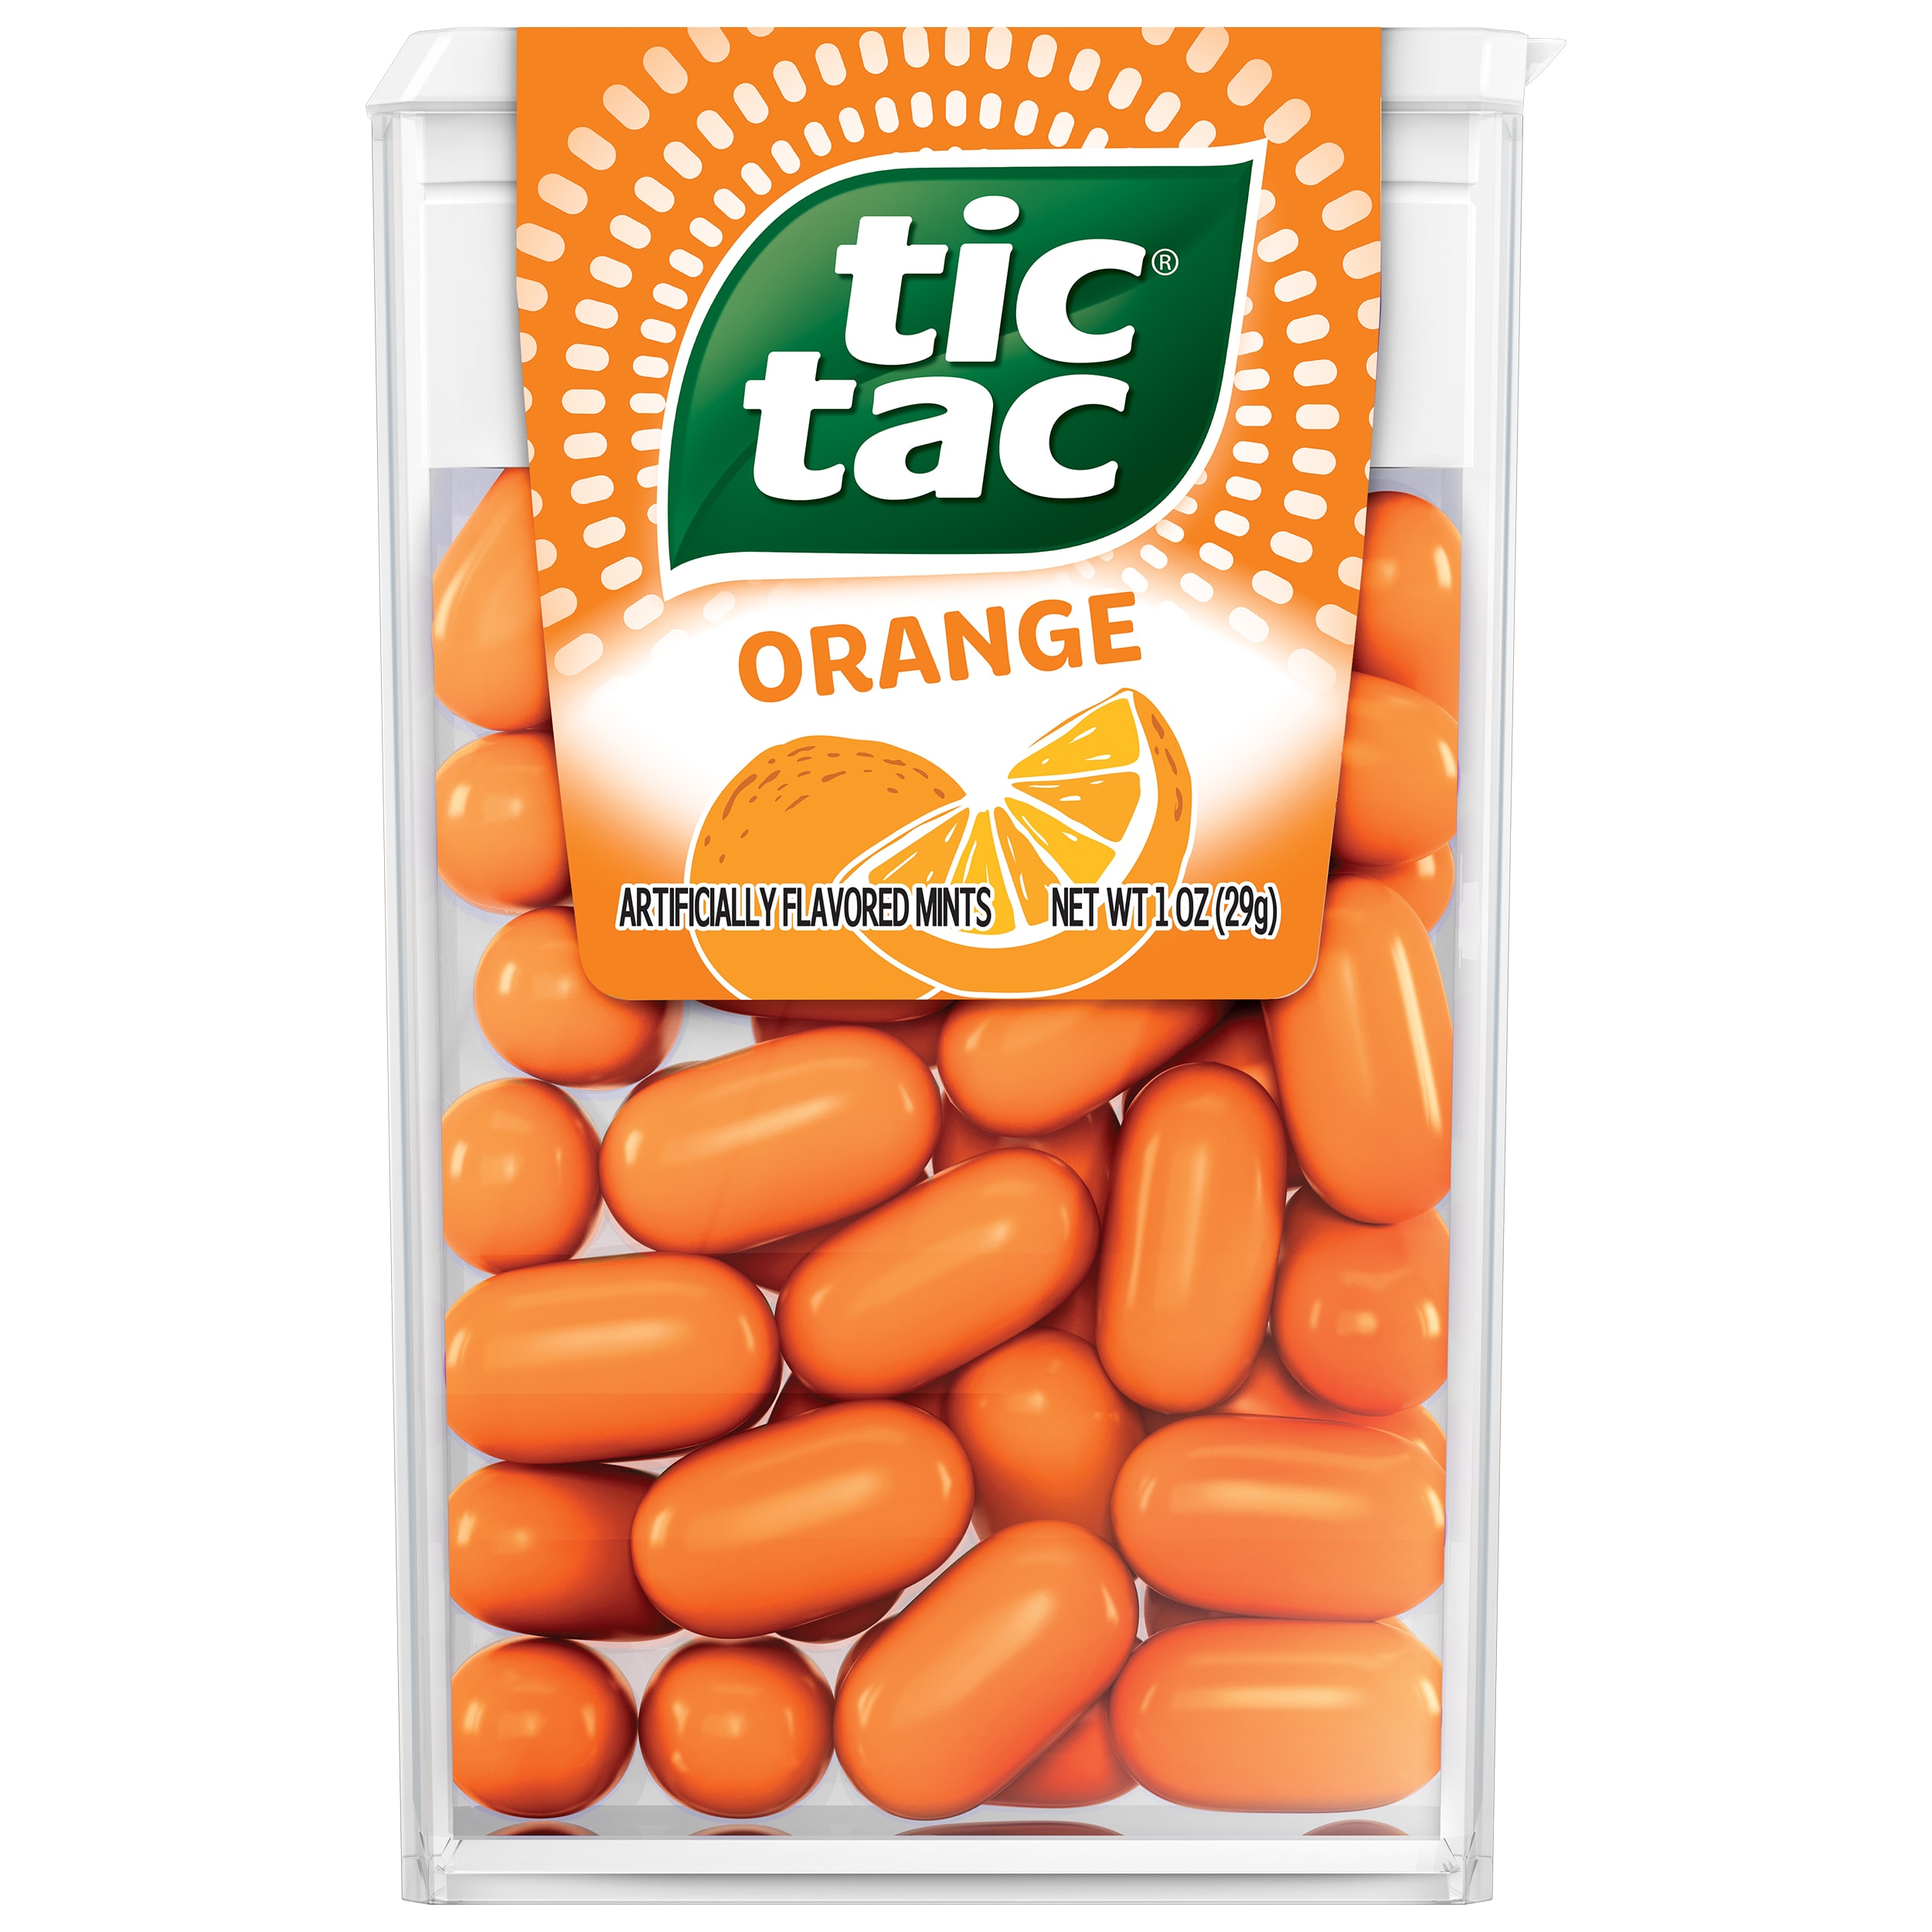 Tic Tac Orange Flavored Mints, On-The-Go Refreshment, Easter Basket Stuffers, 1 oz, Single Pack - image 1 of 10